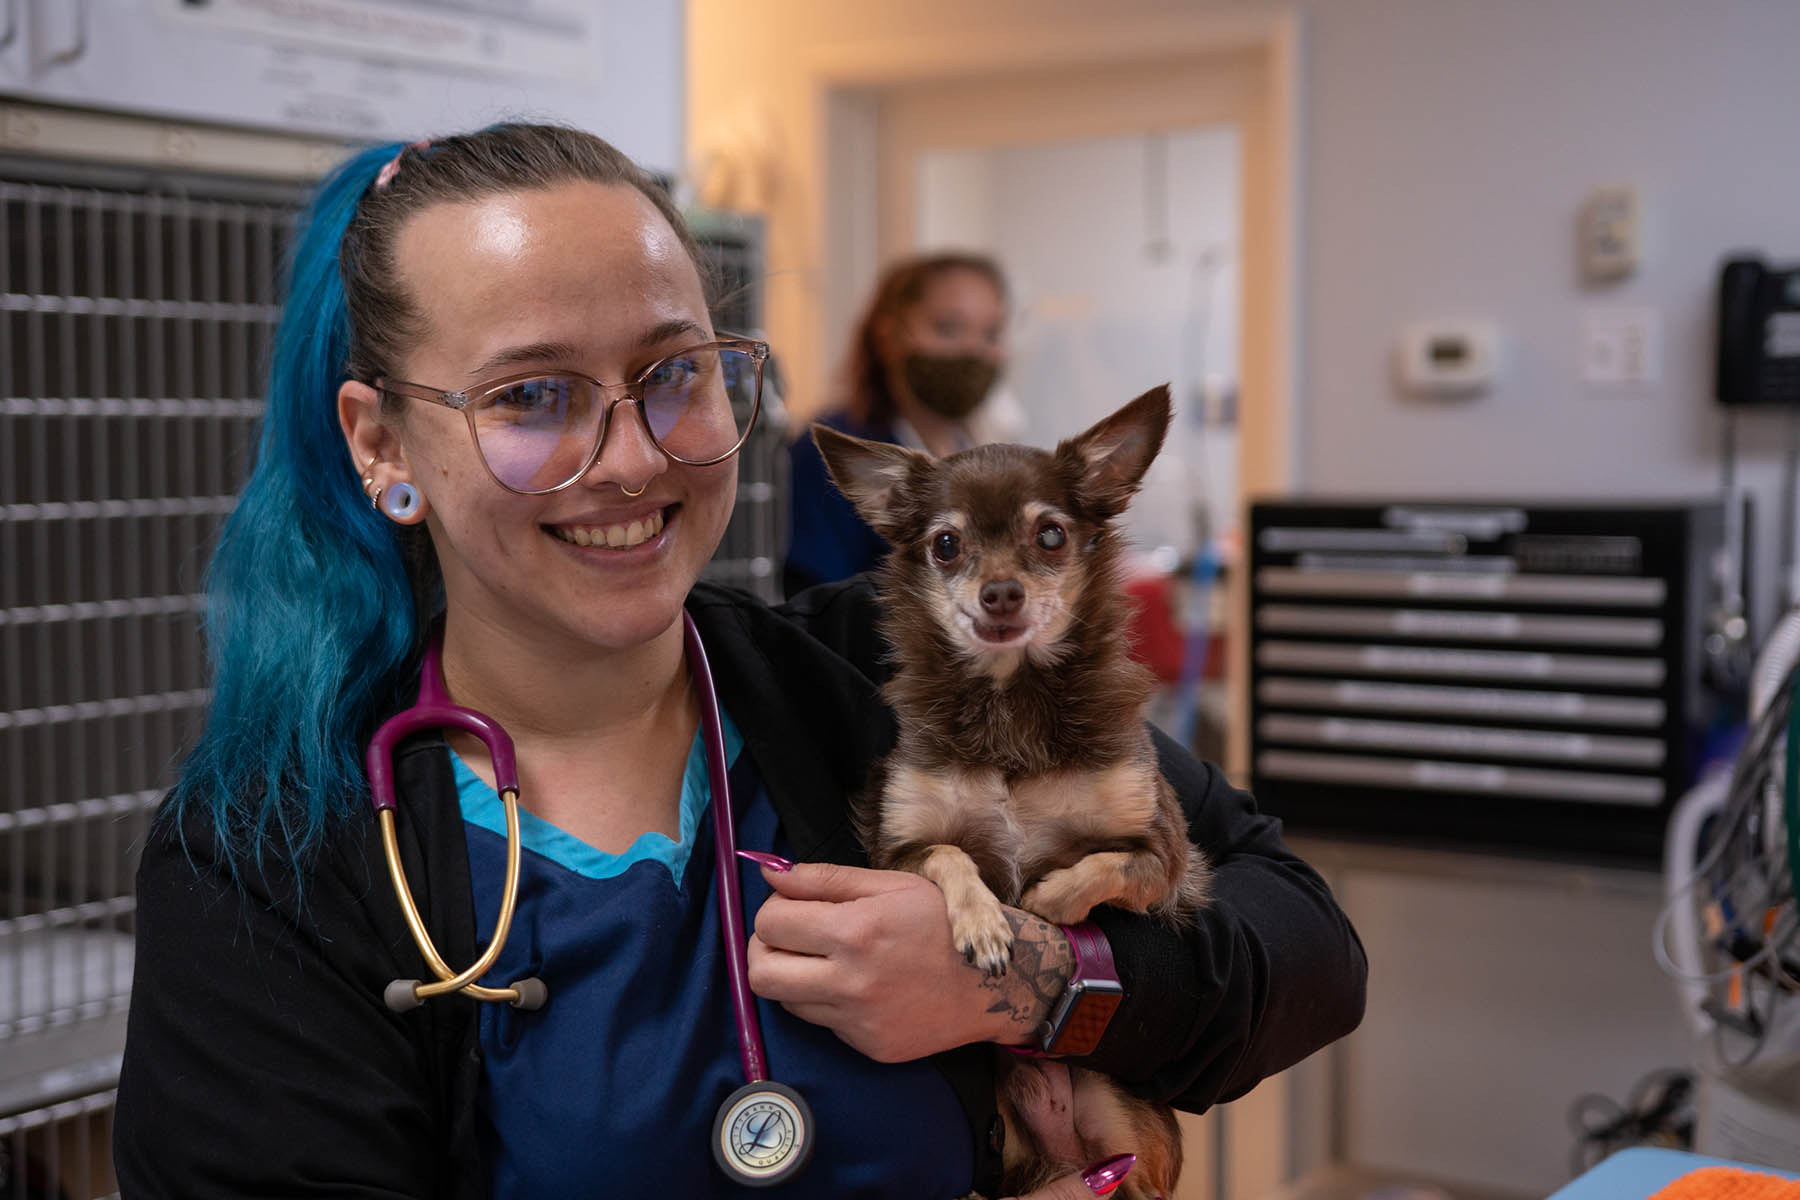 A member of the Ironhorse team wearing black and blue scrubs, smiling and holding a small long hair chihuahua